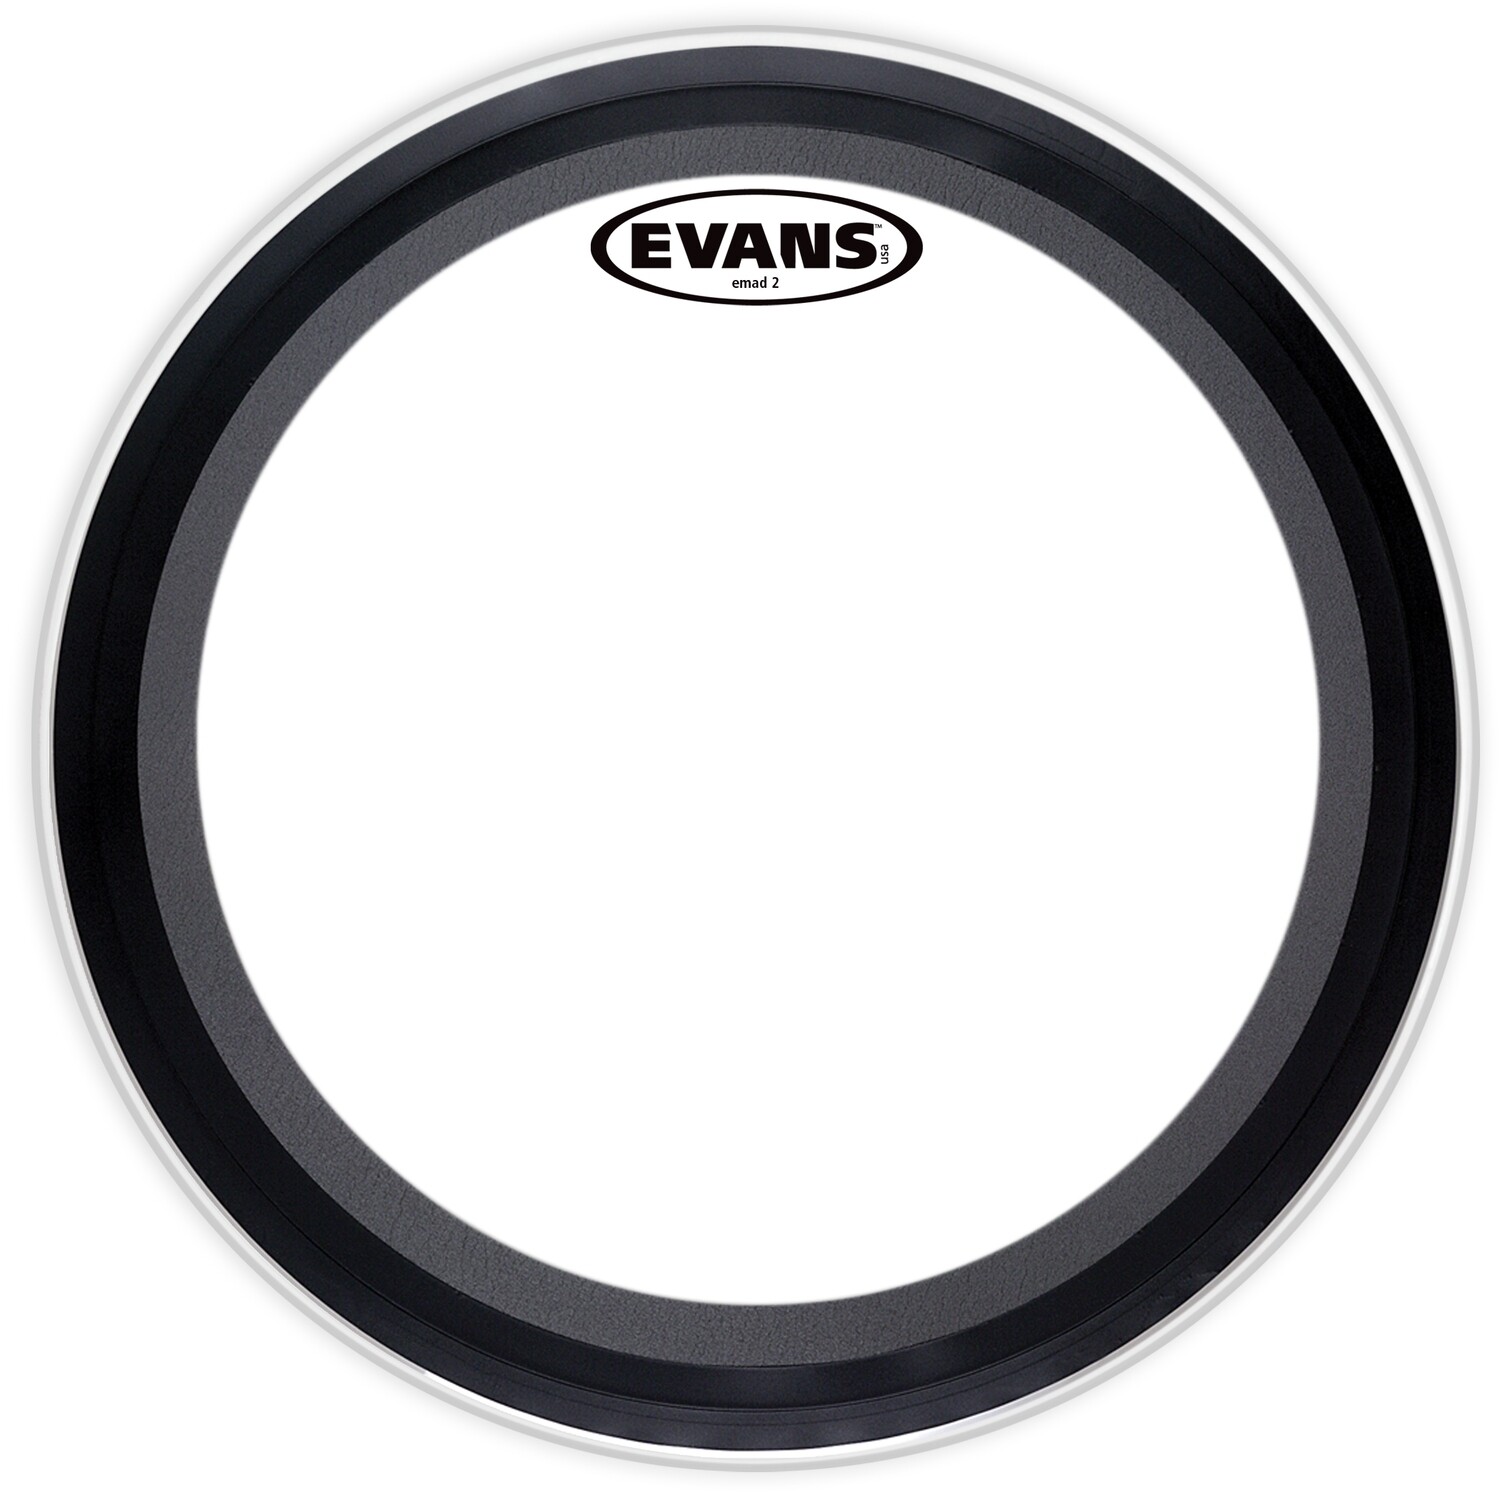 EVANS BD20EMAD2 EMAD2 20'' CLEAR BATTER BASS